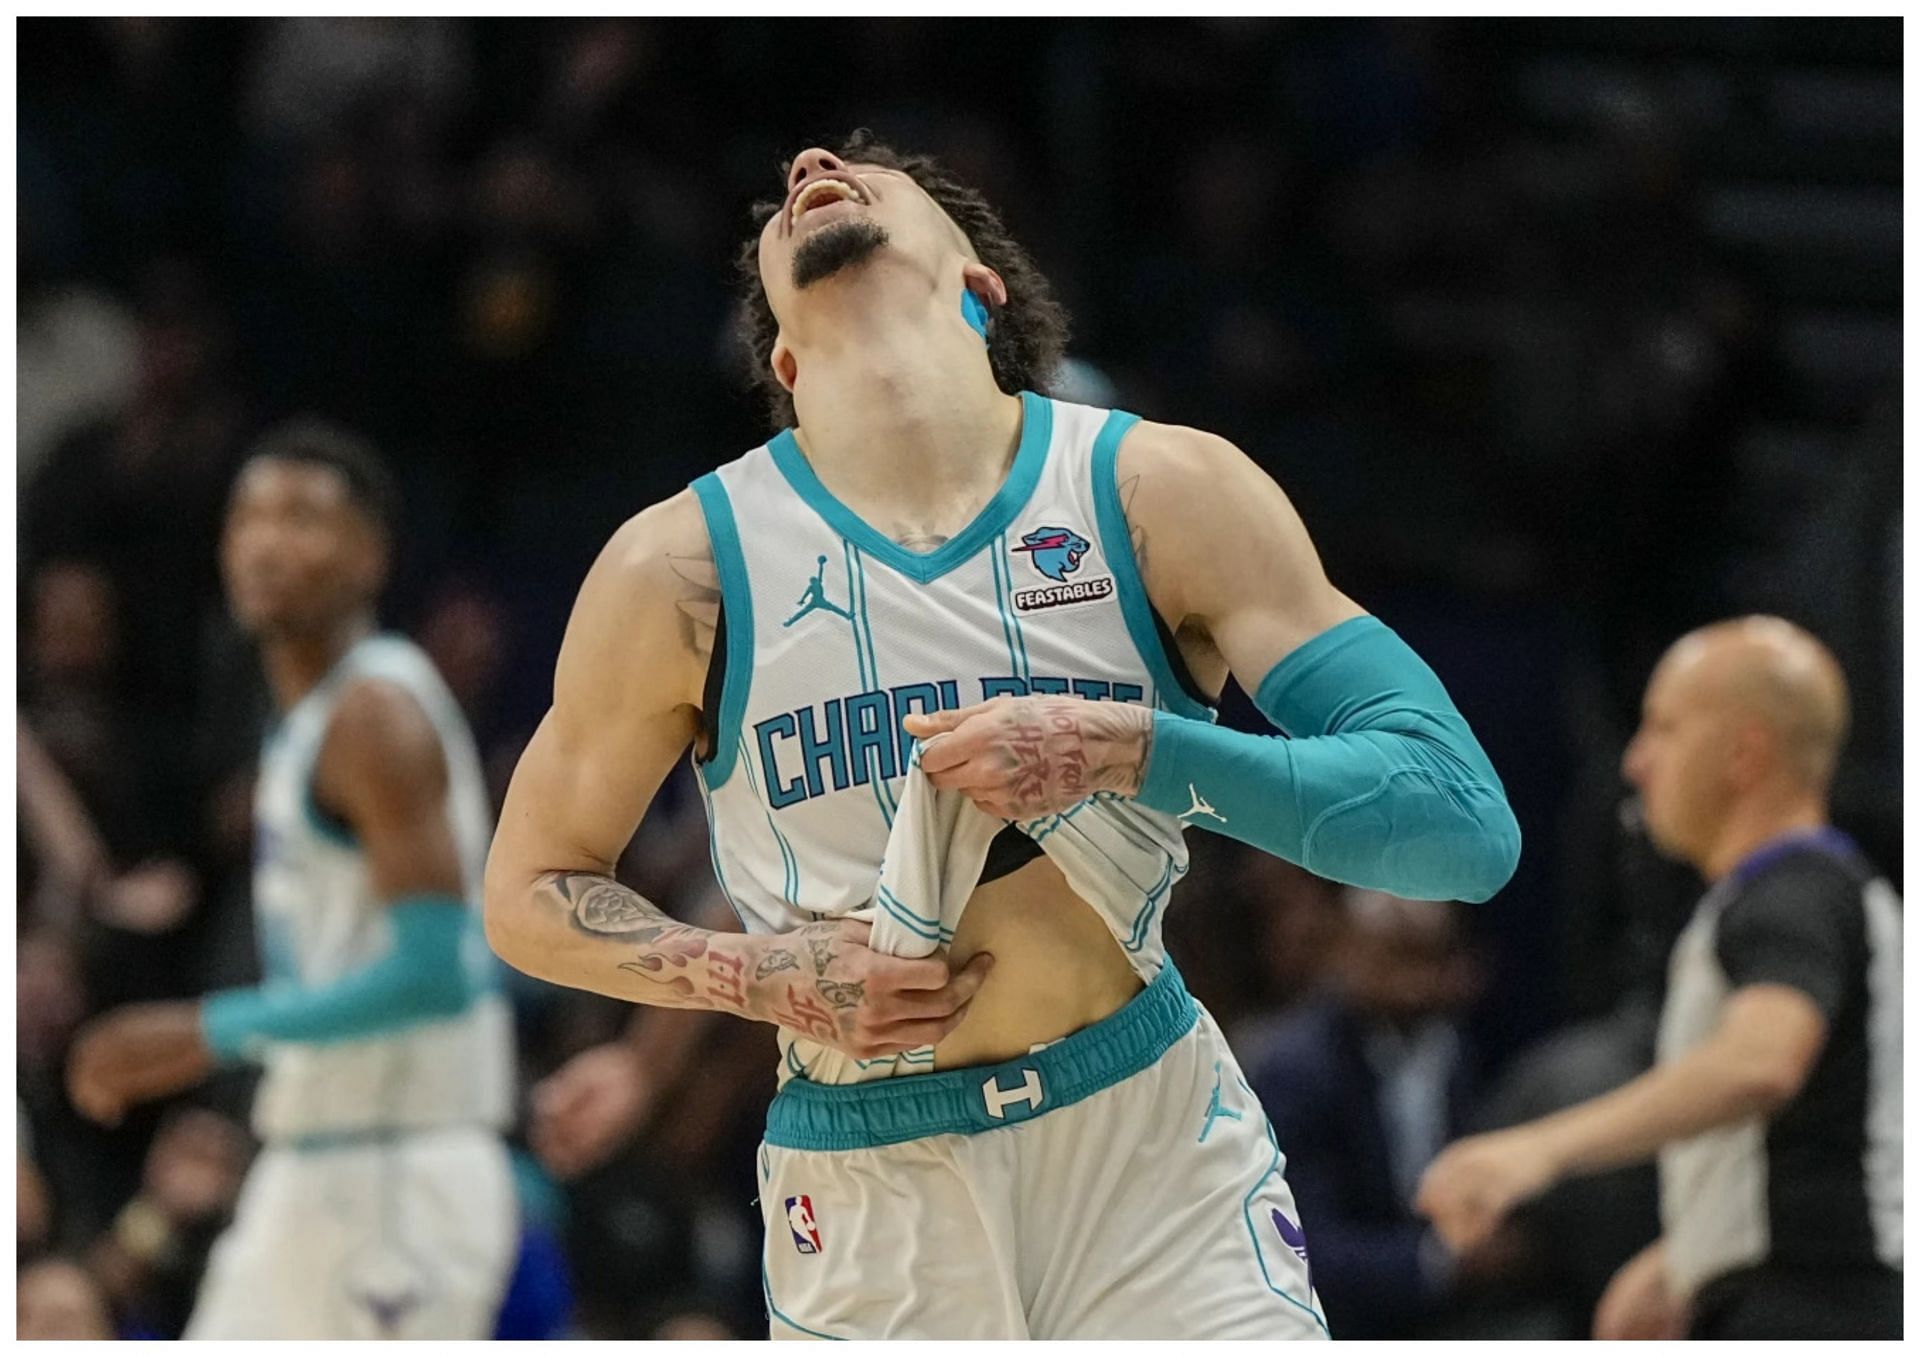 Charlotte Hornets superstar guard LaMelo Ball continues to recover from an ankle injury he suffered on November 26 (AP Photo/Chris Carlson)